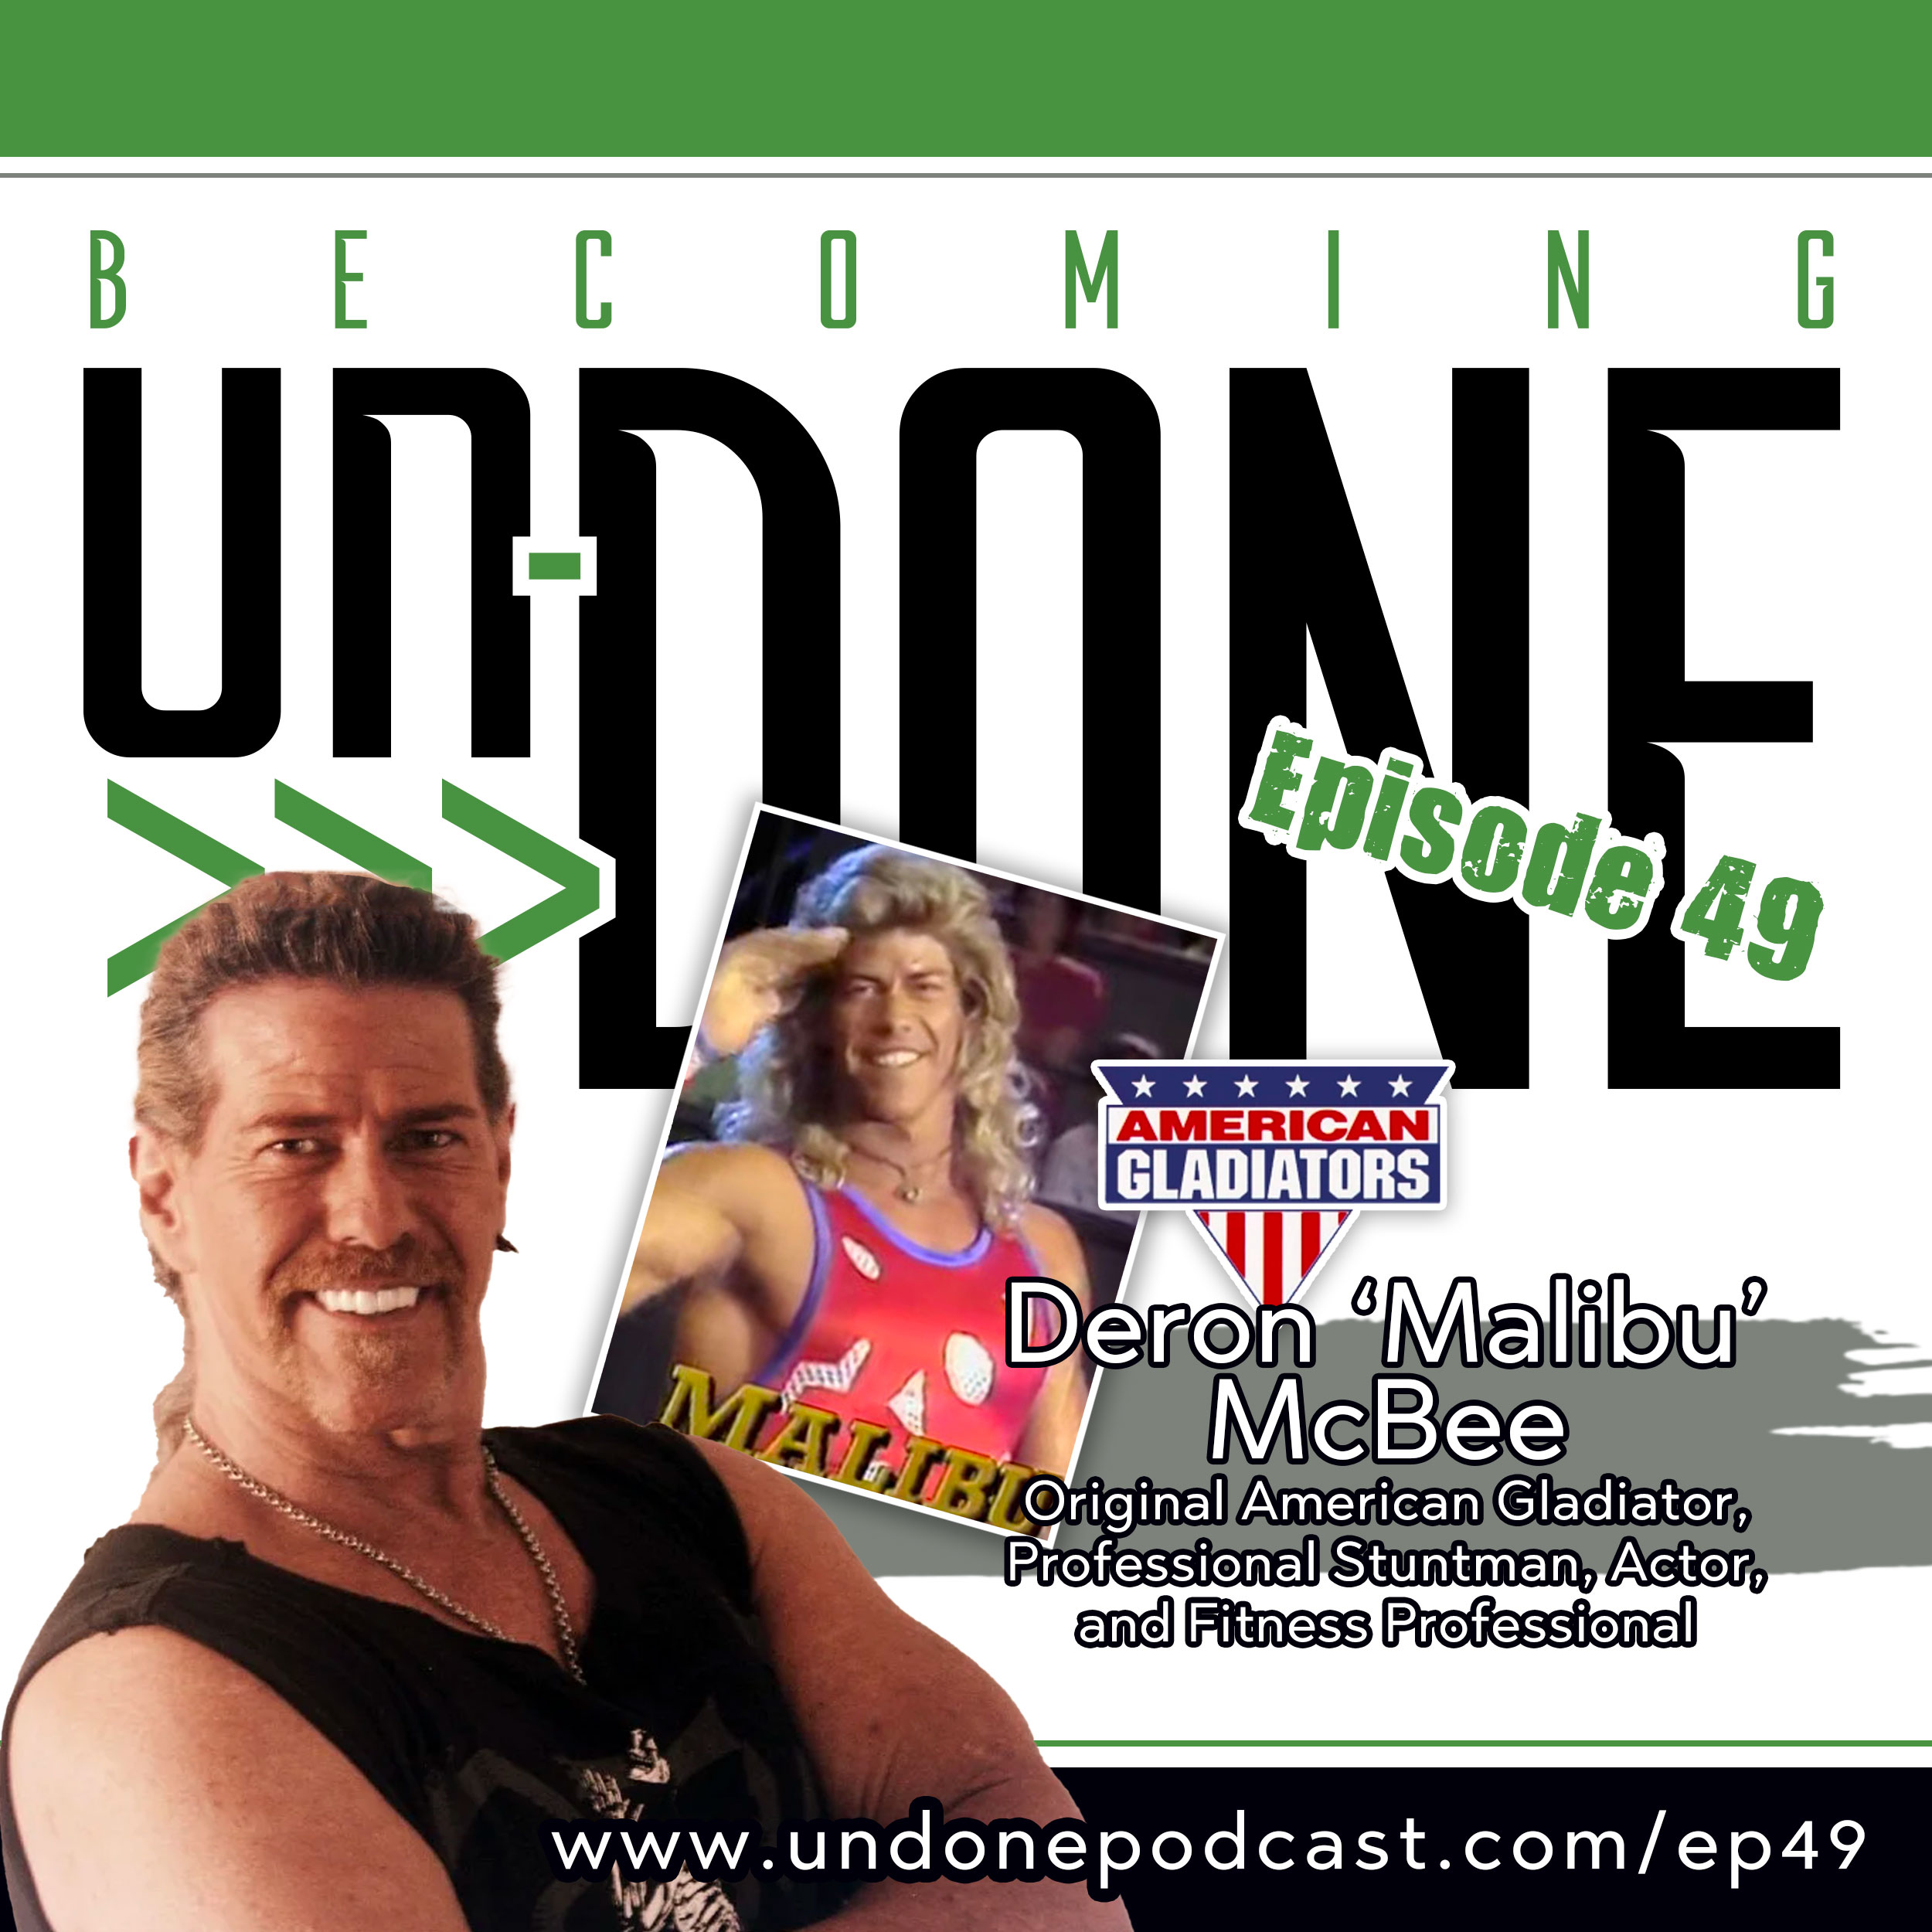 Episode 46: HURDLES with Tim Kight